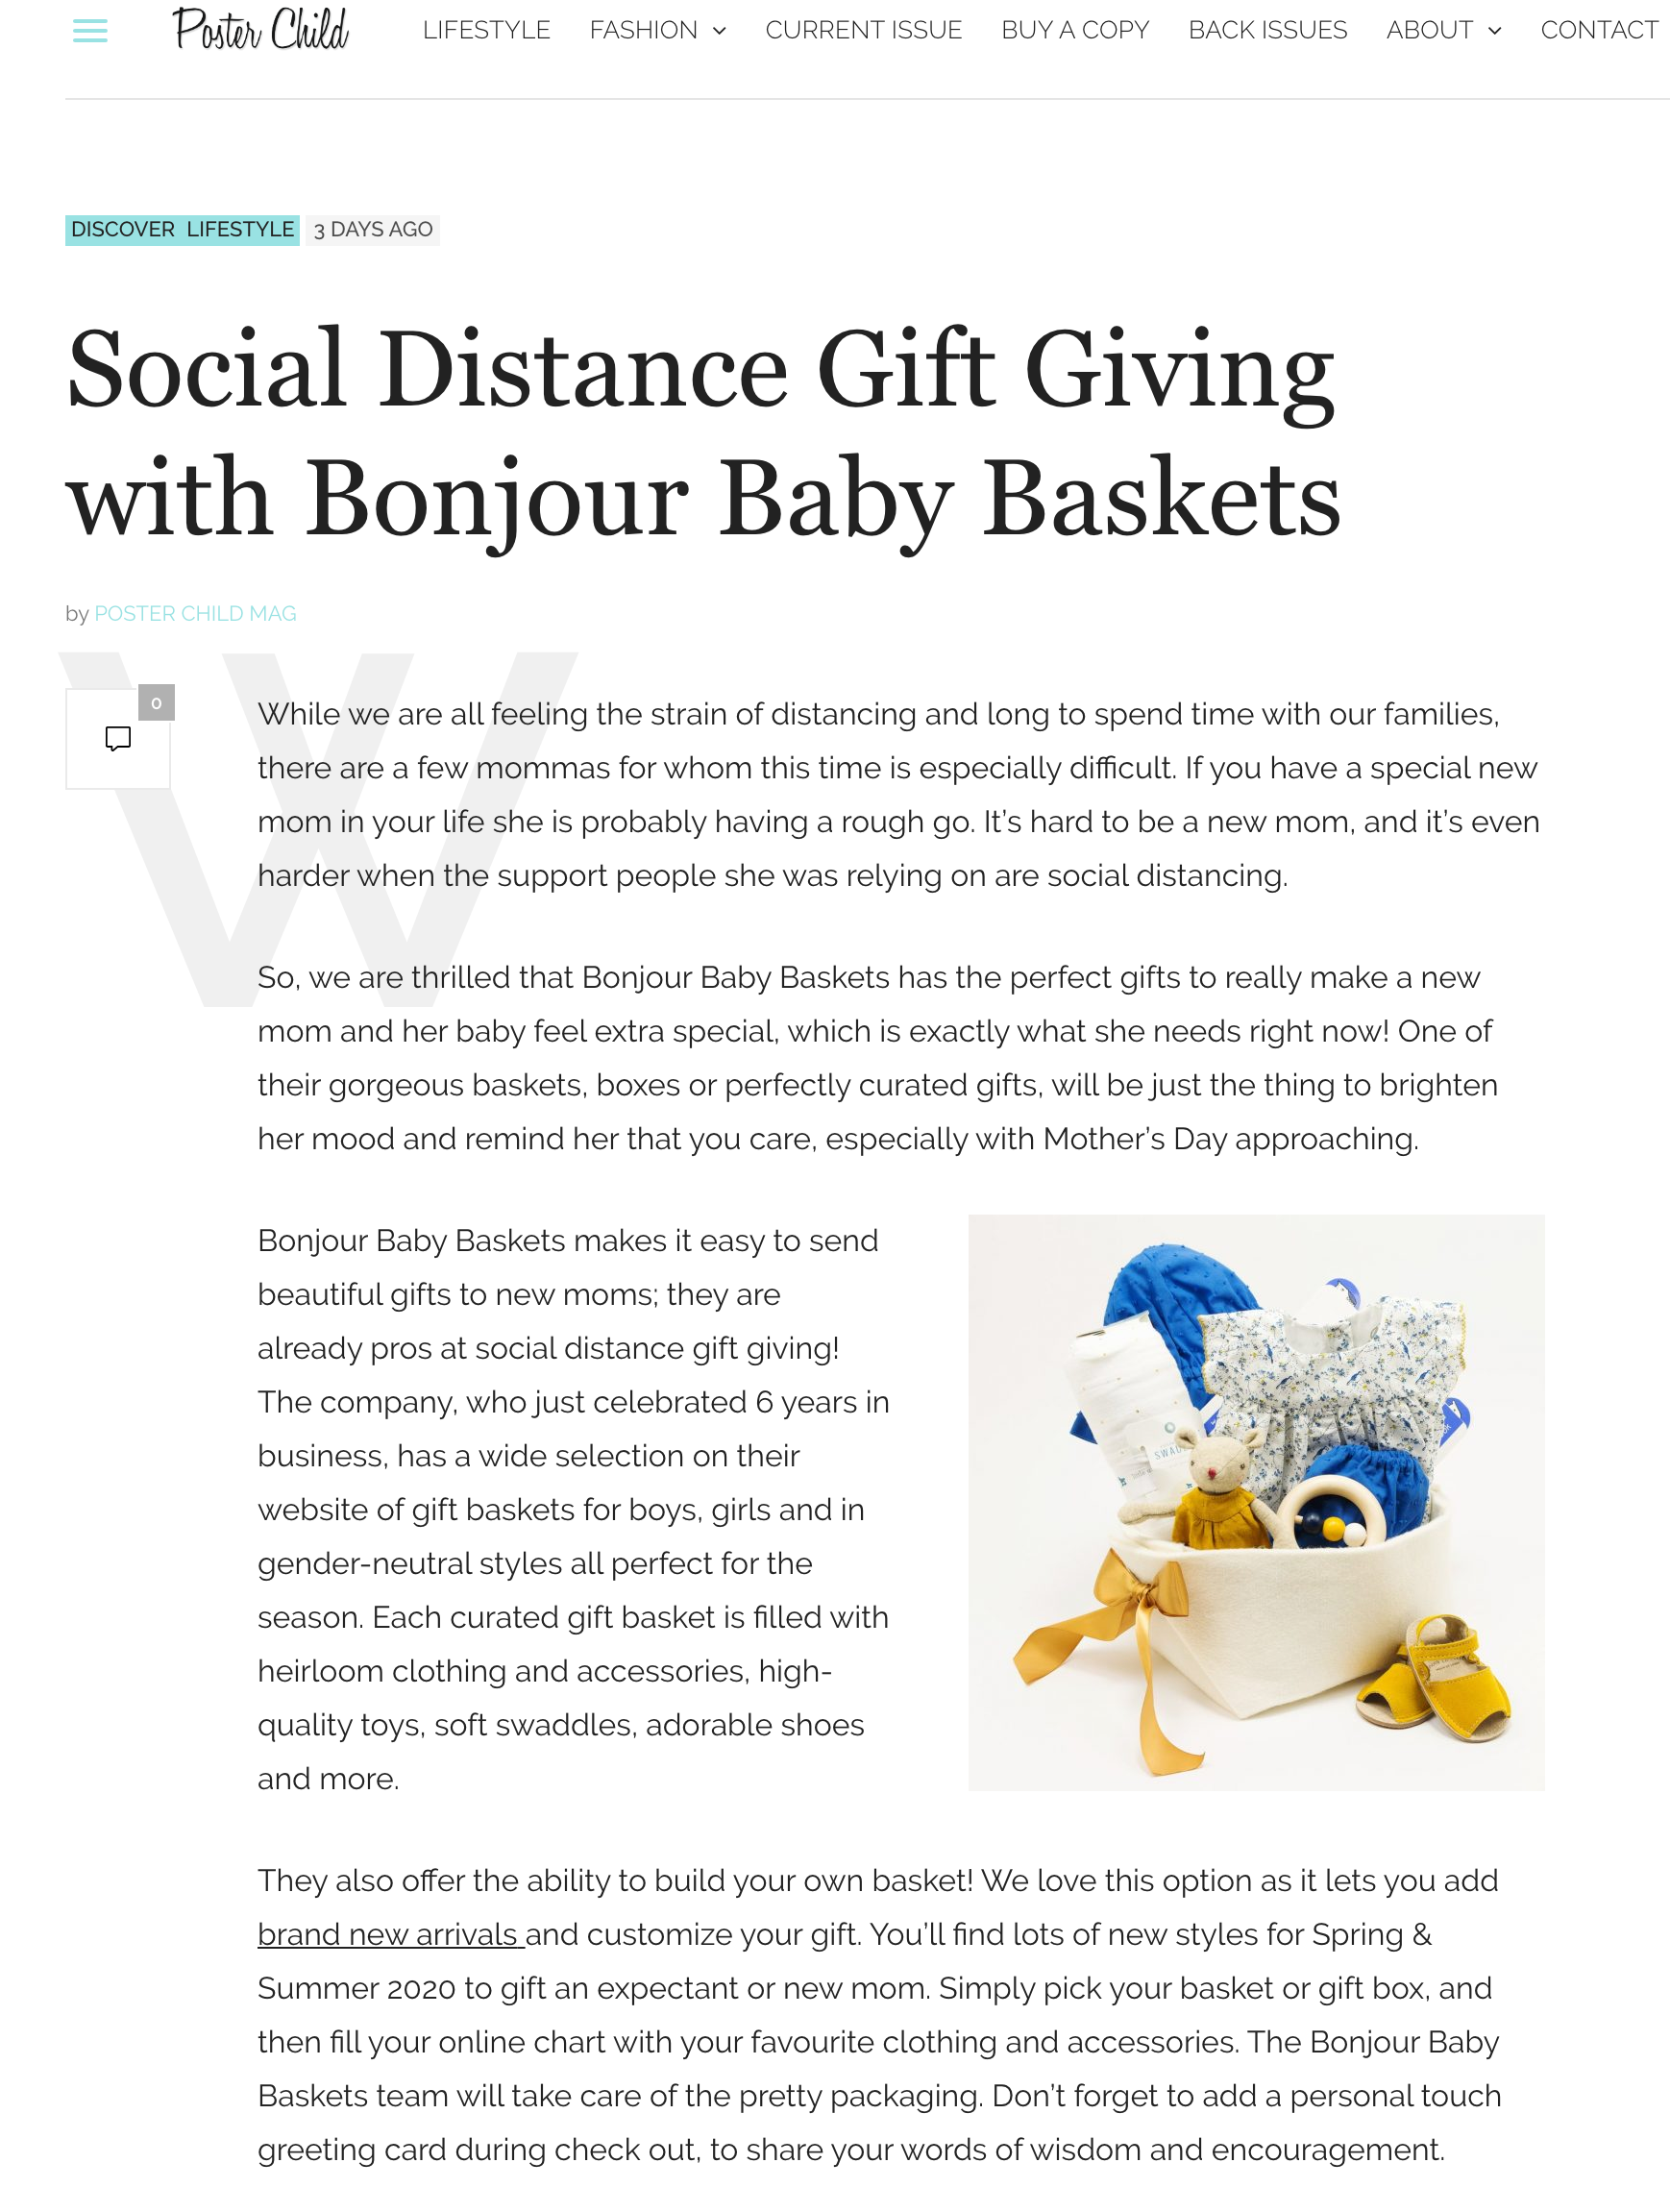 Social Distance Gift Giving with Bonjour Baby Baskets